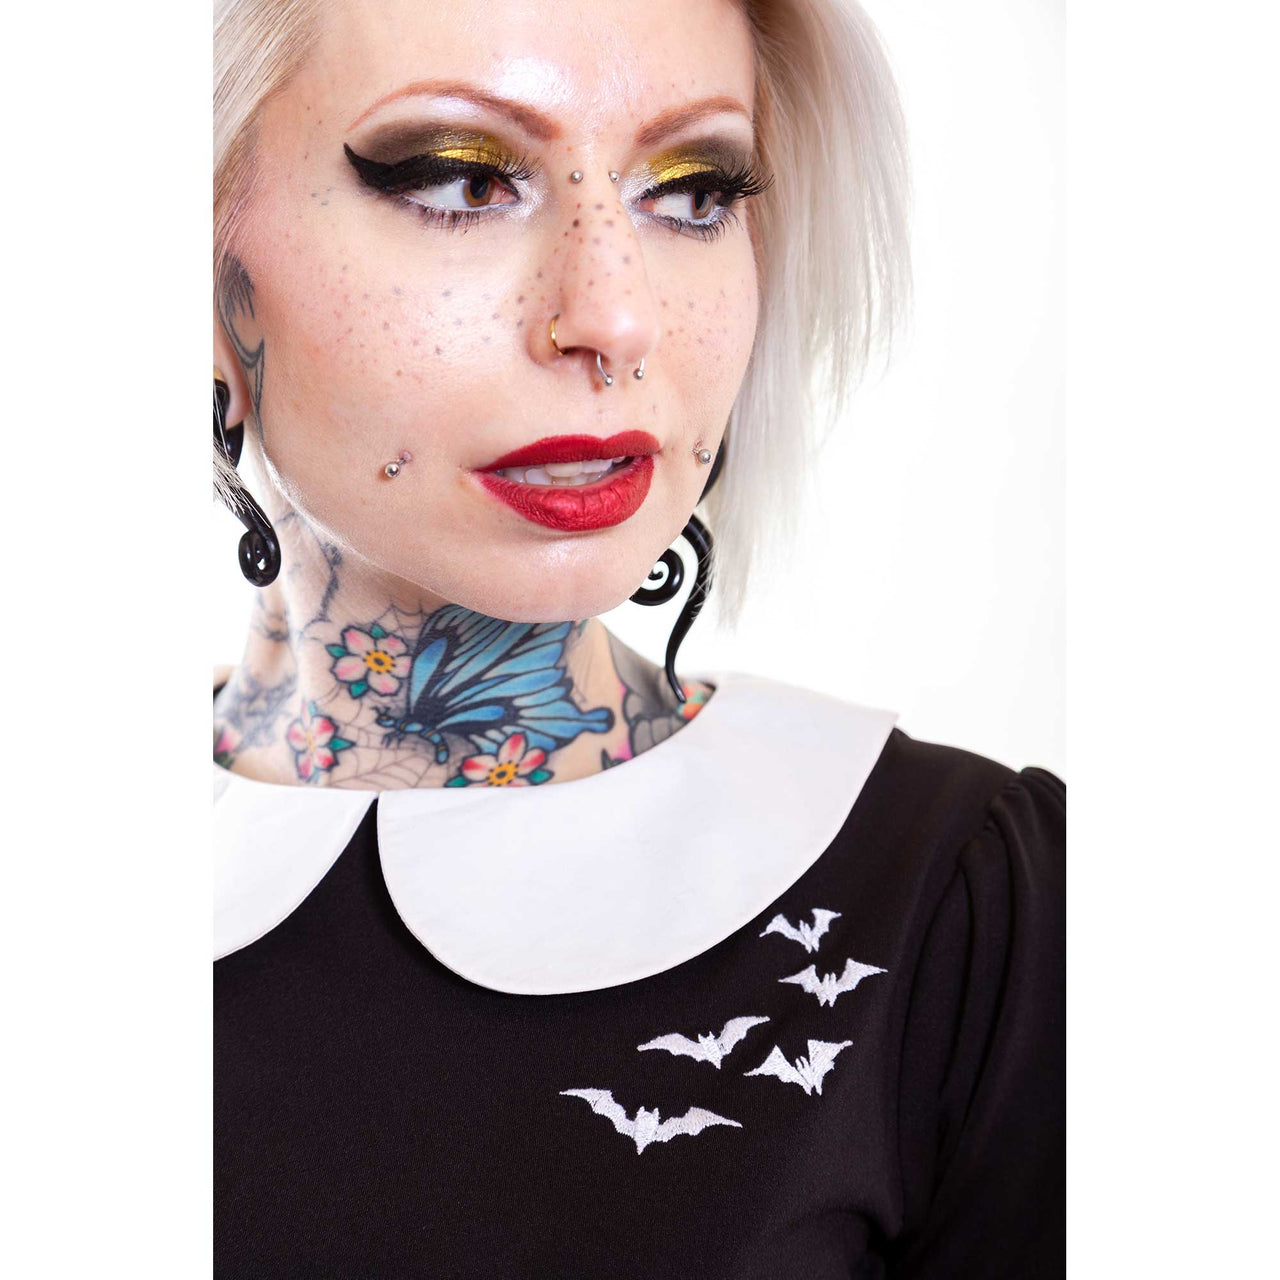 GHOUL TROUBLE ROUND COLLAR BATS DRESS